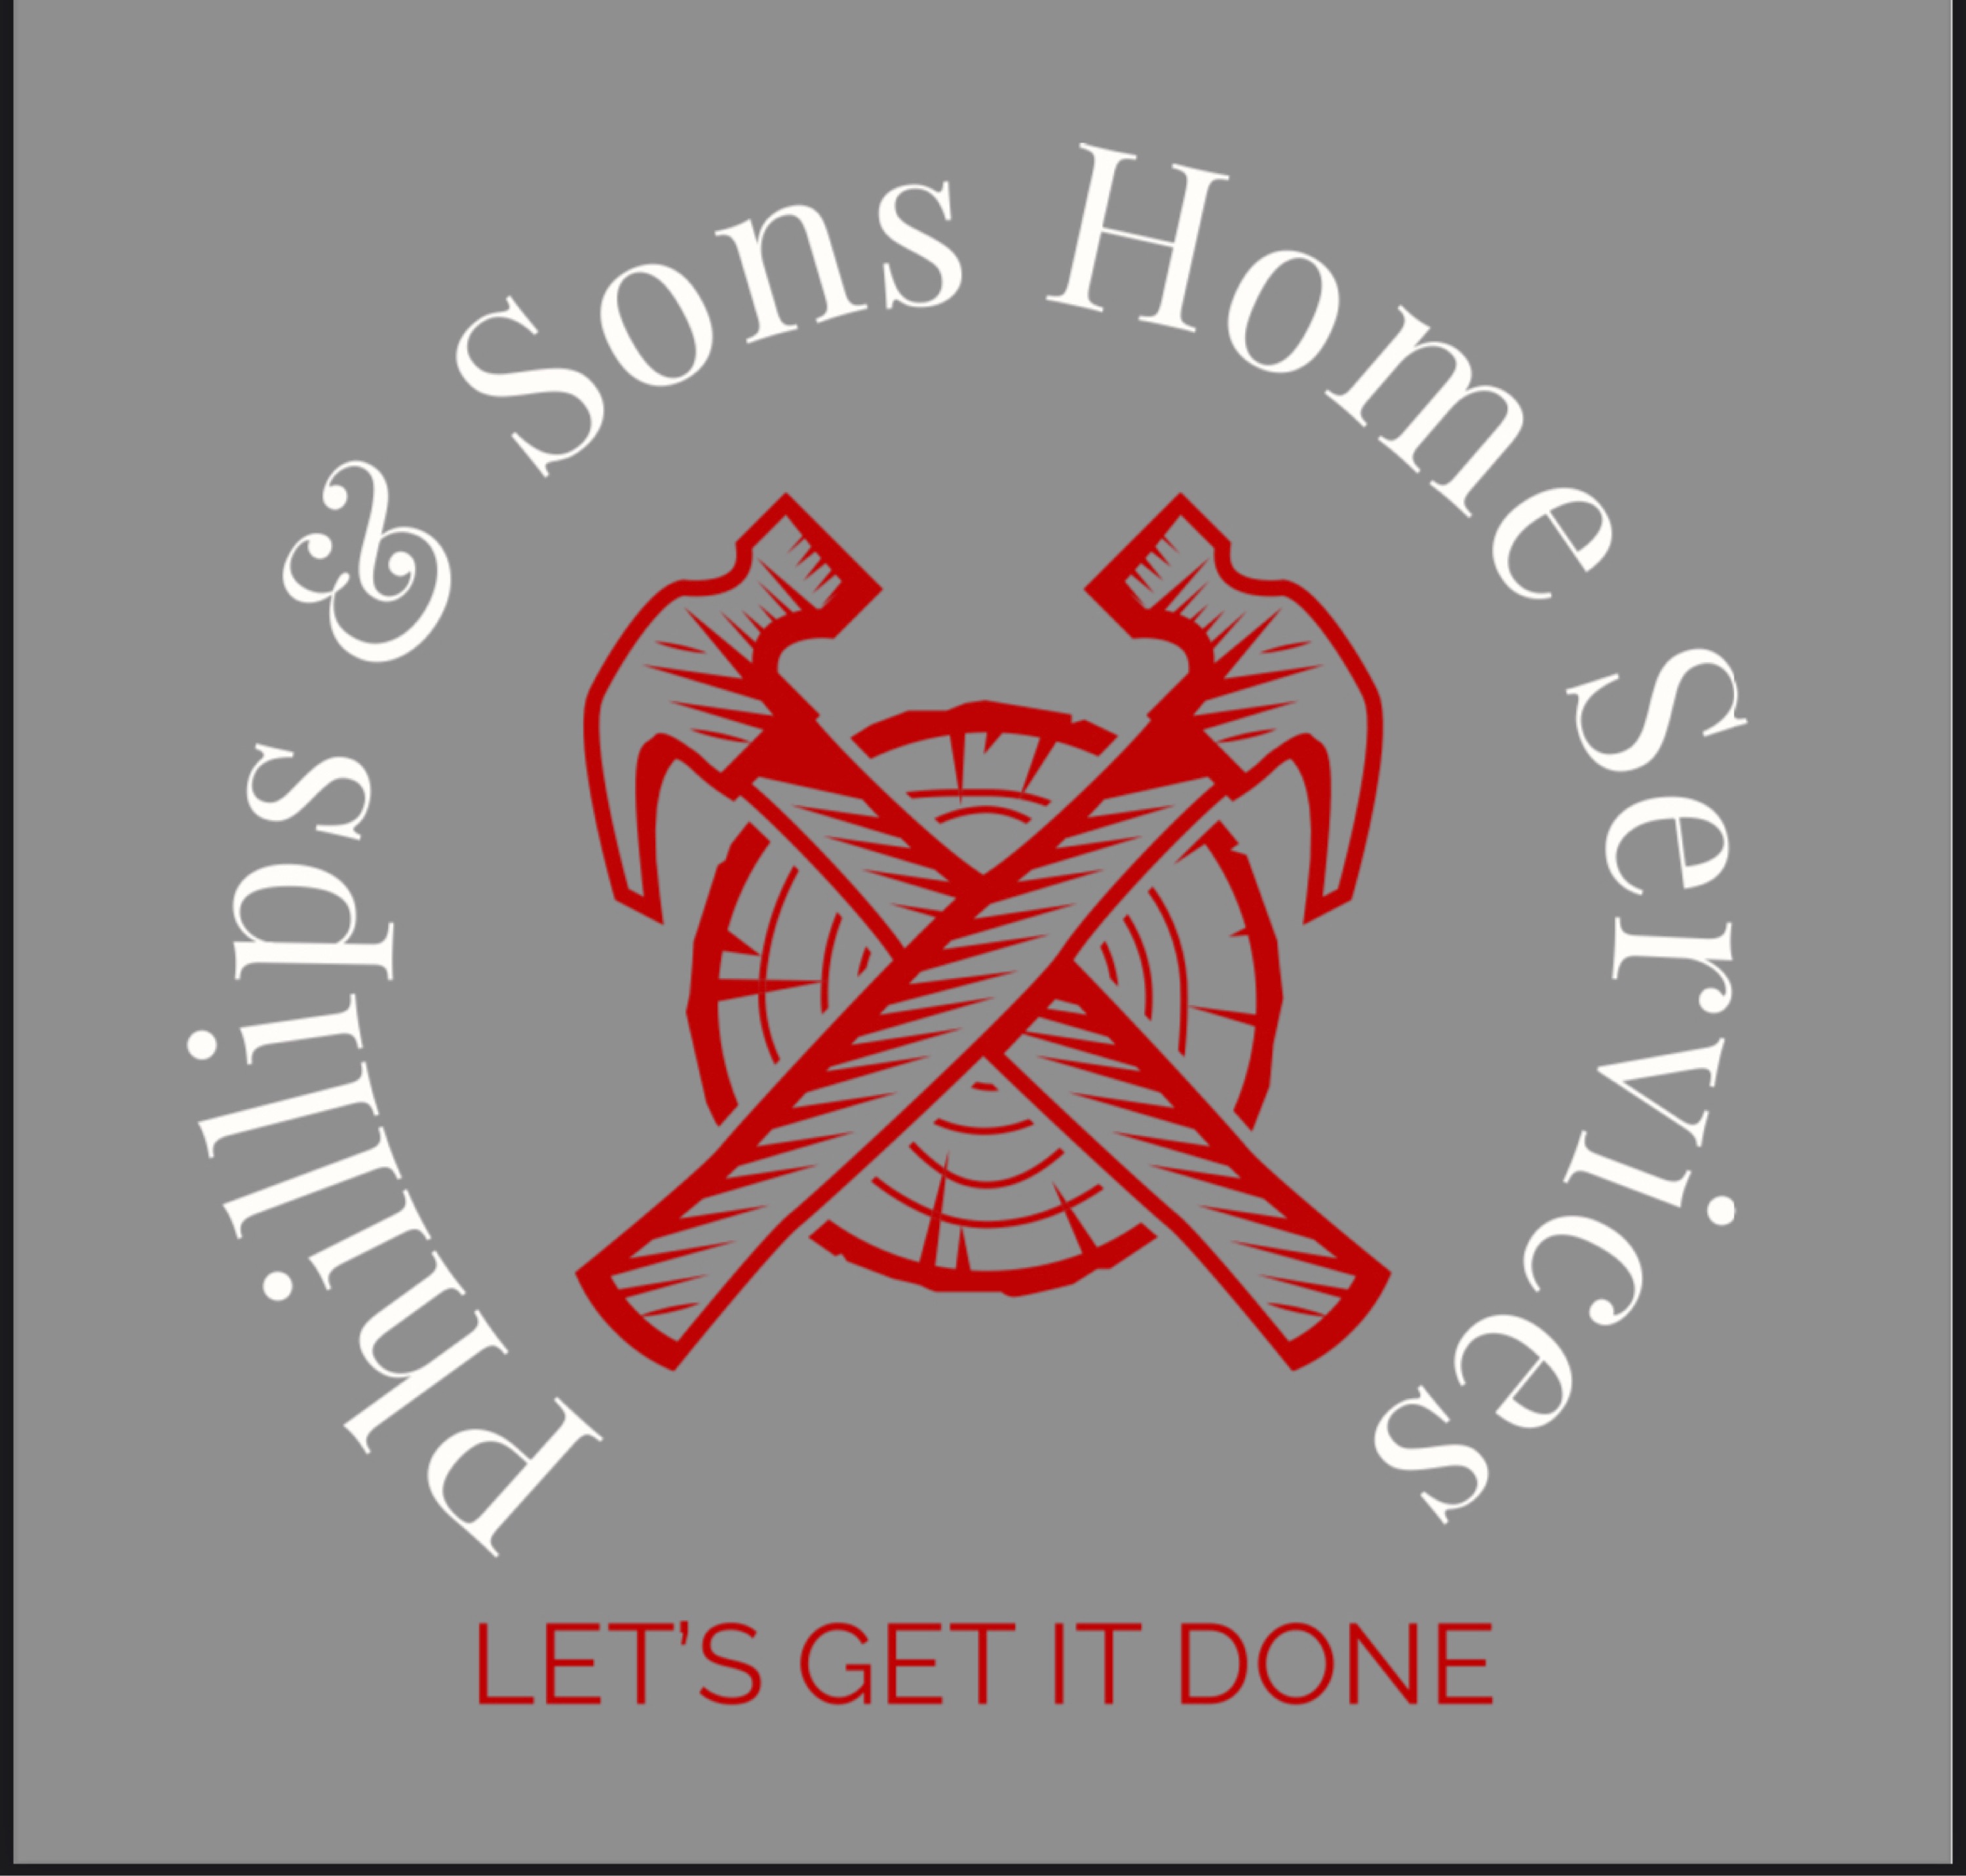 Phillips & Sons Home Services Logo